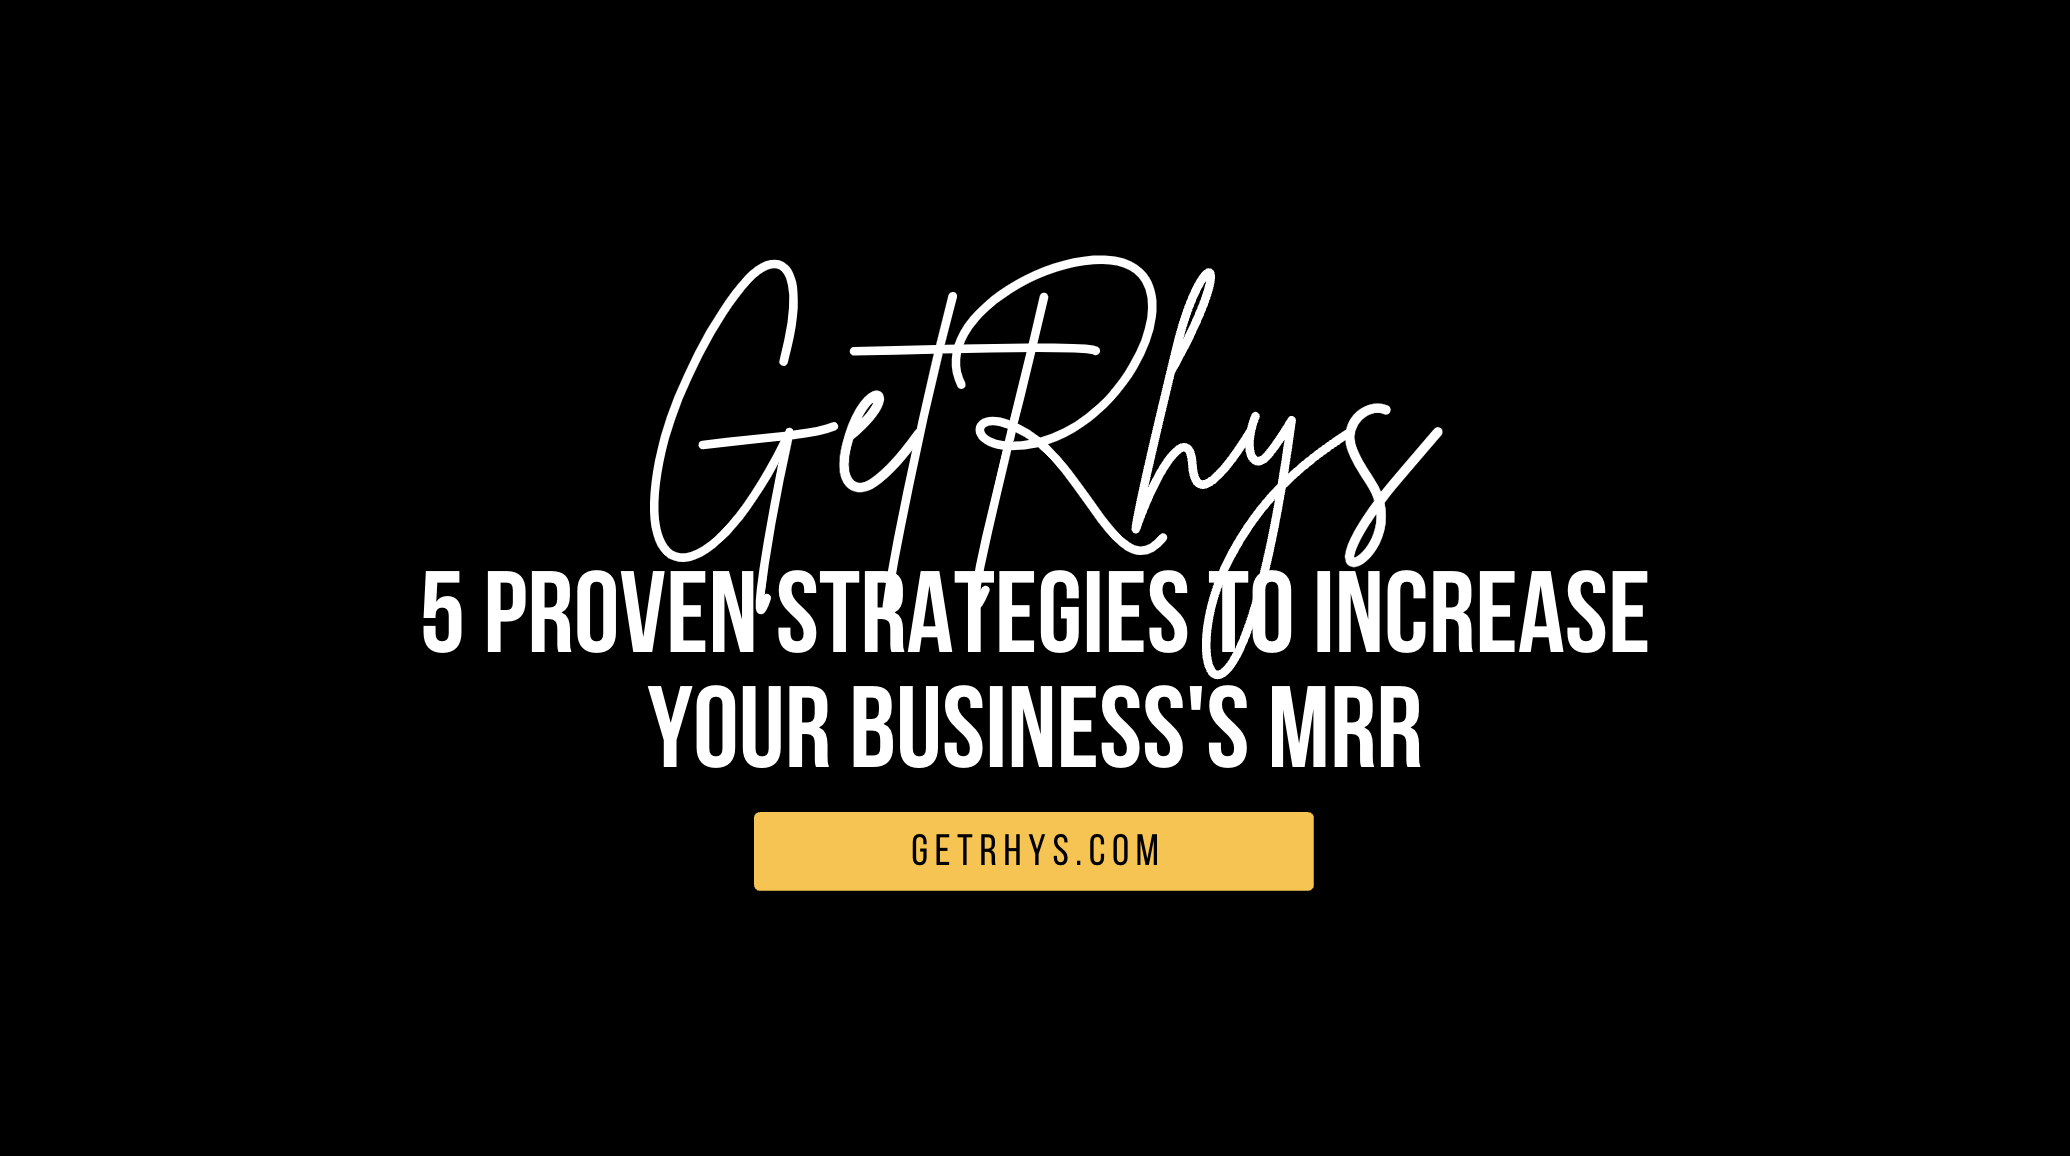 5 proven strategies to increase your business's MRR